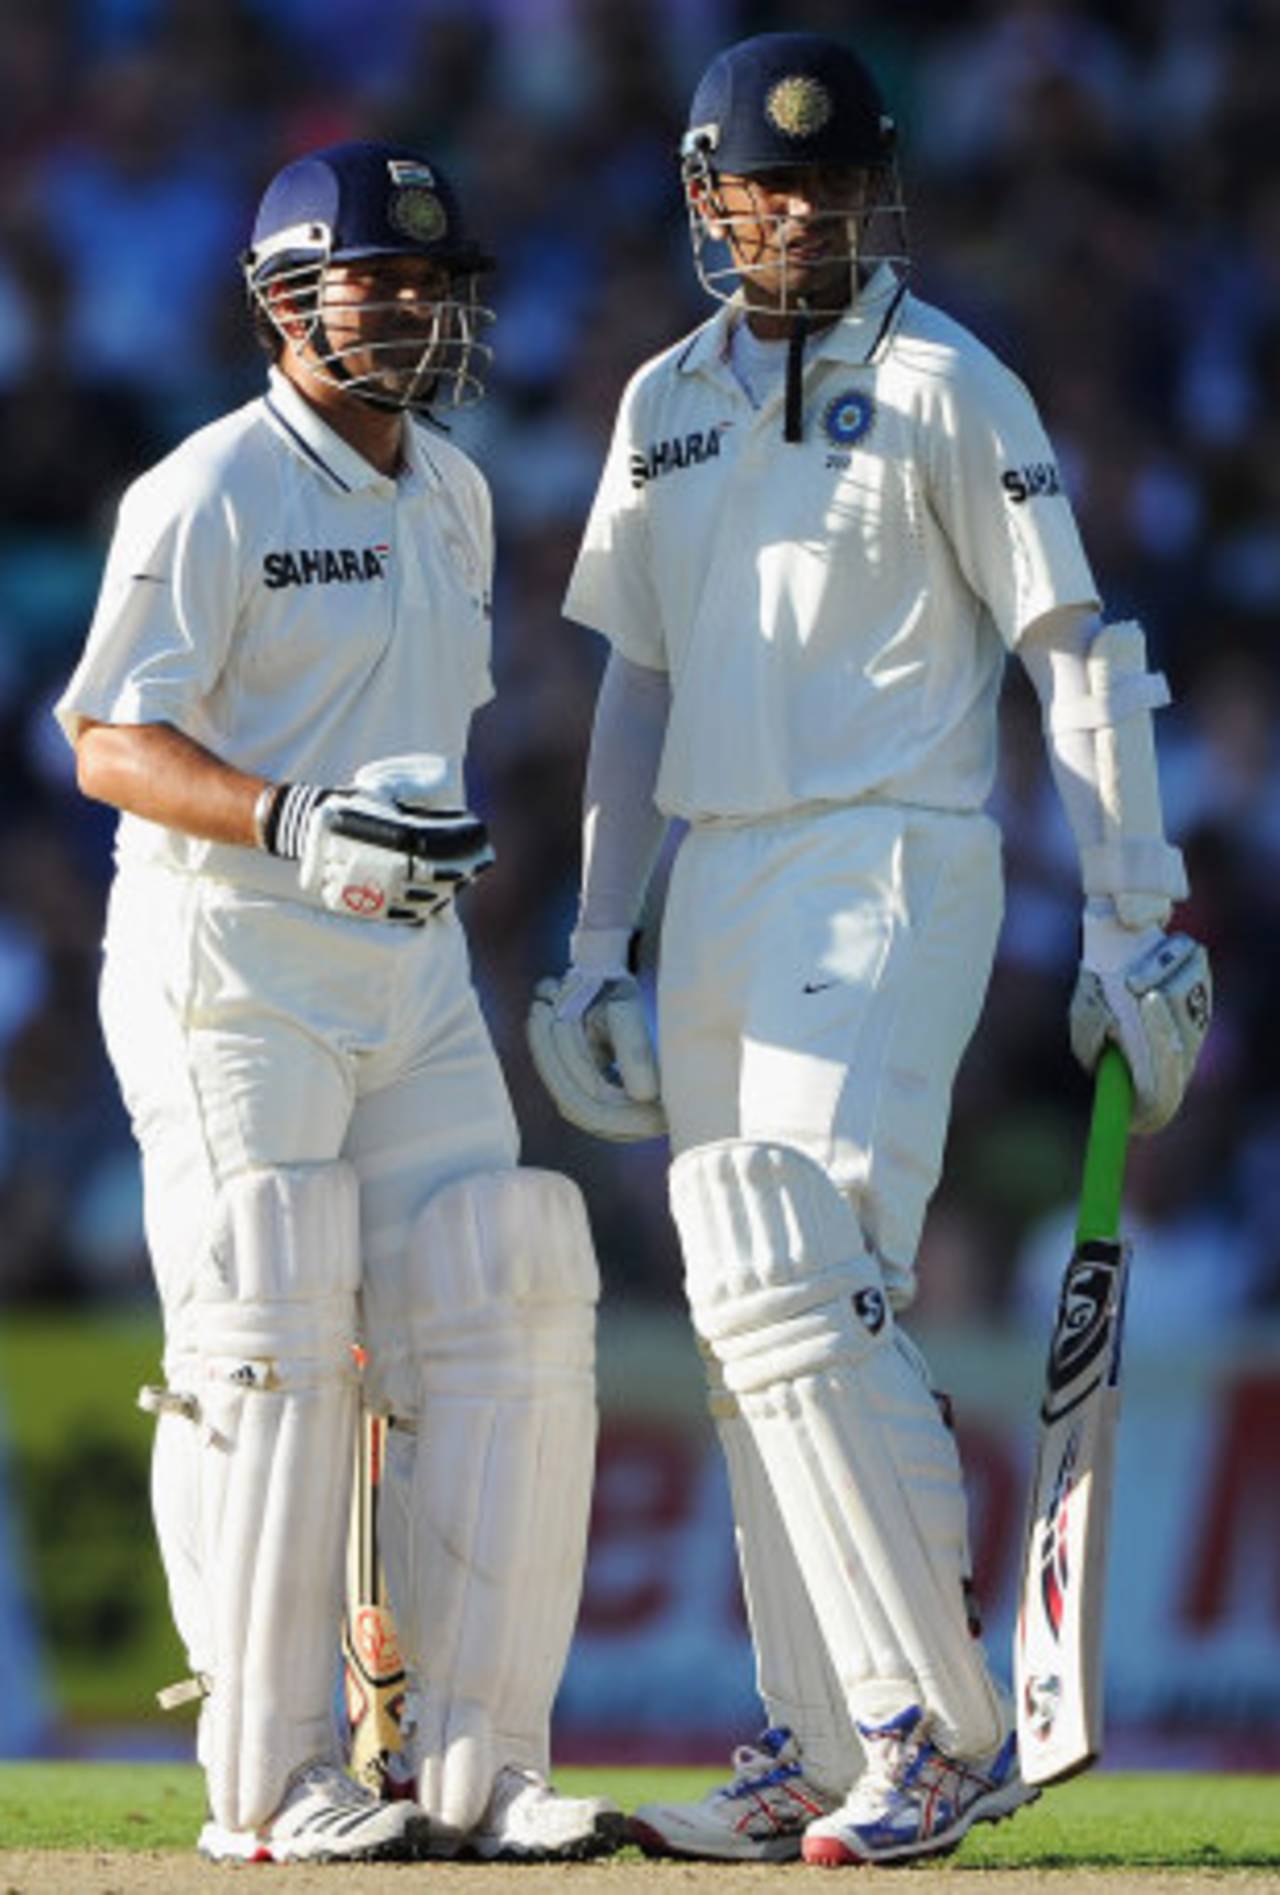 Rahul Dravid and Sachin Tendulkar added 55 for the third wicket, England v India, 4th Test, The Oval, 3rd day, August 20, 2011